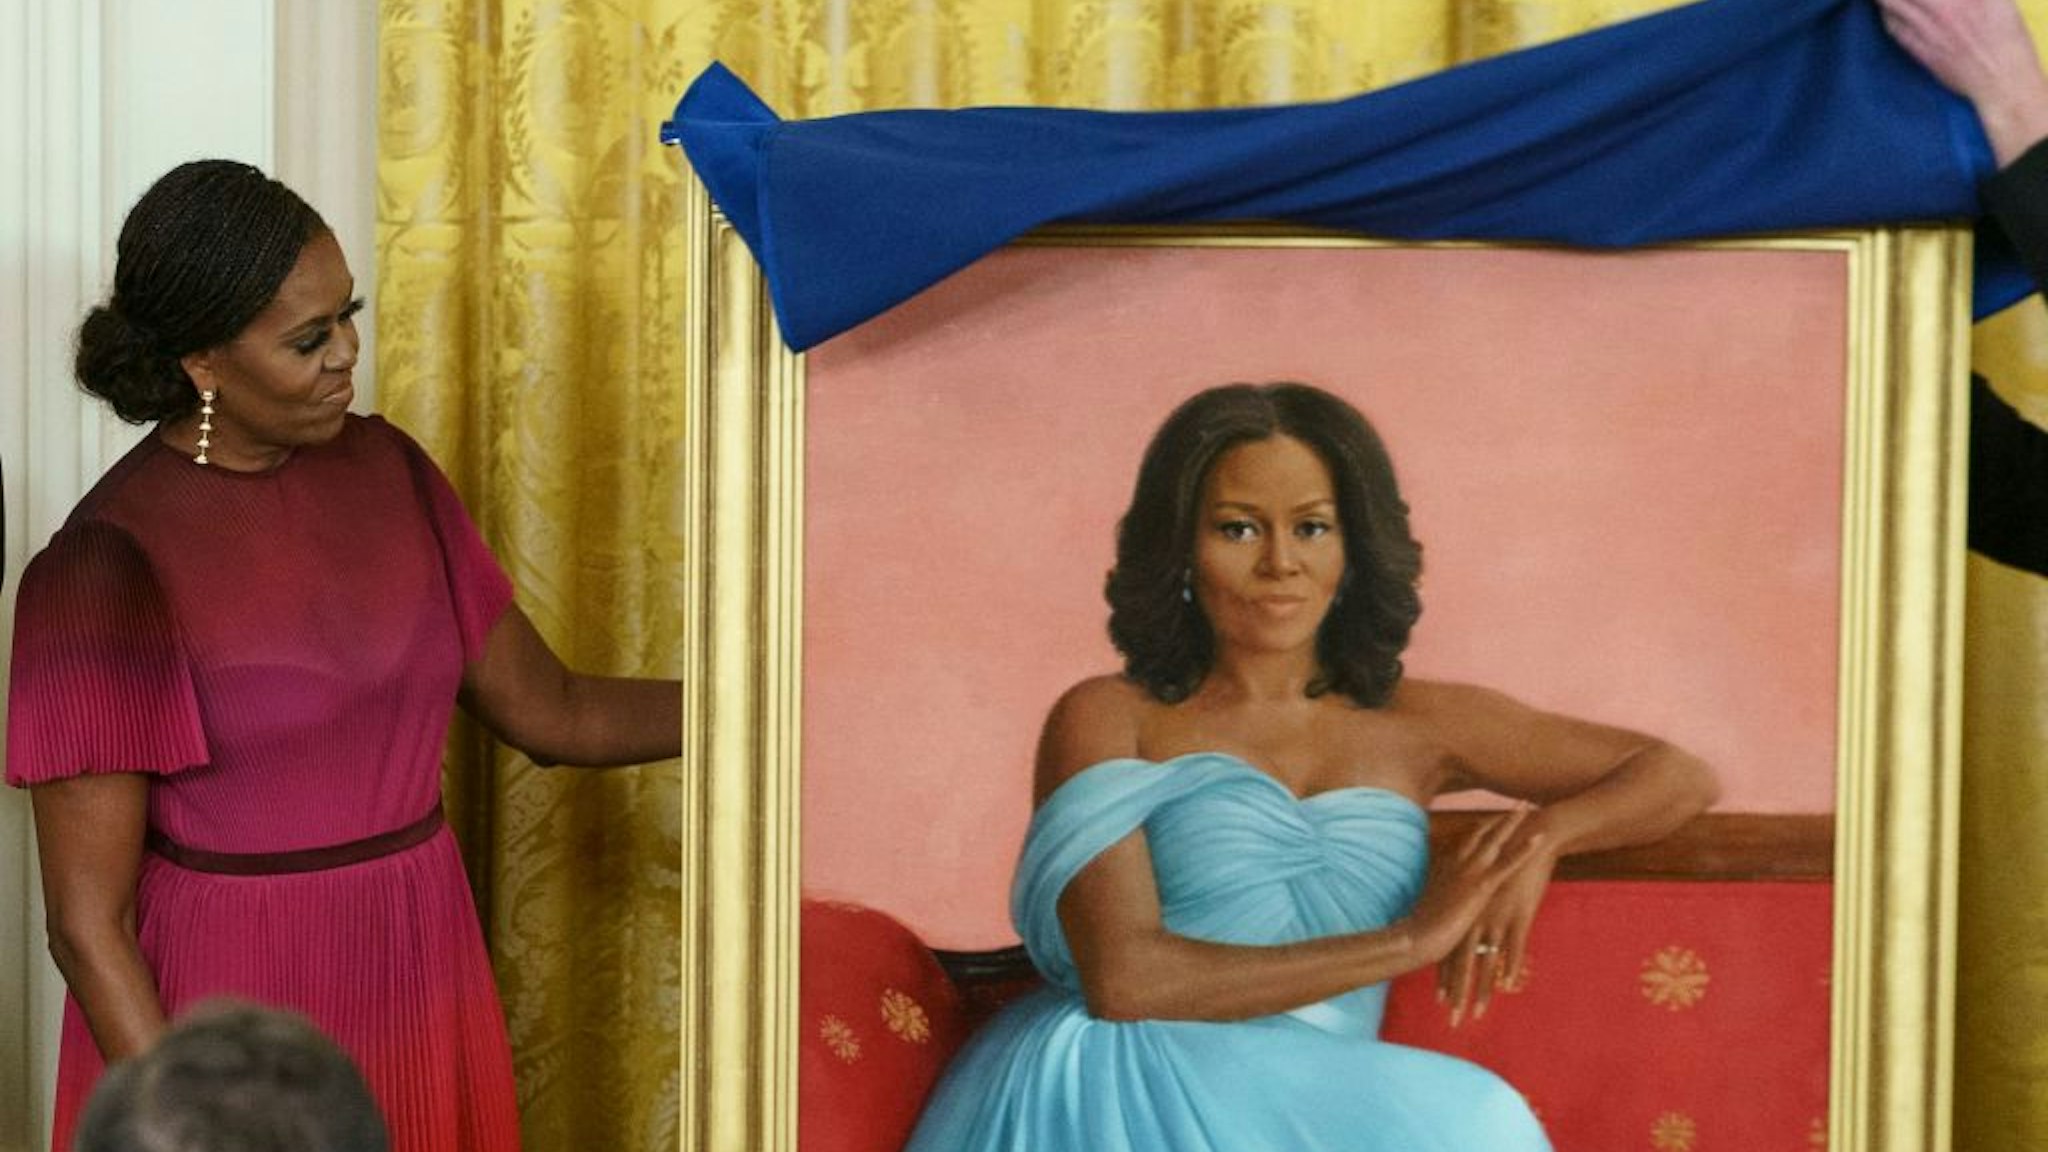 Former US First Lady Michelle Obama participates in a ceremony to unveil her official White House portrait, in the East Room of the White House in Washington, DC, on September 7, 2022.